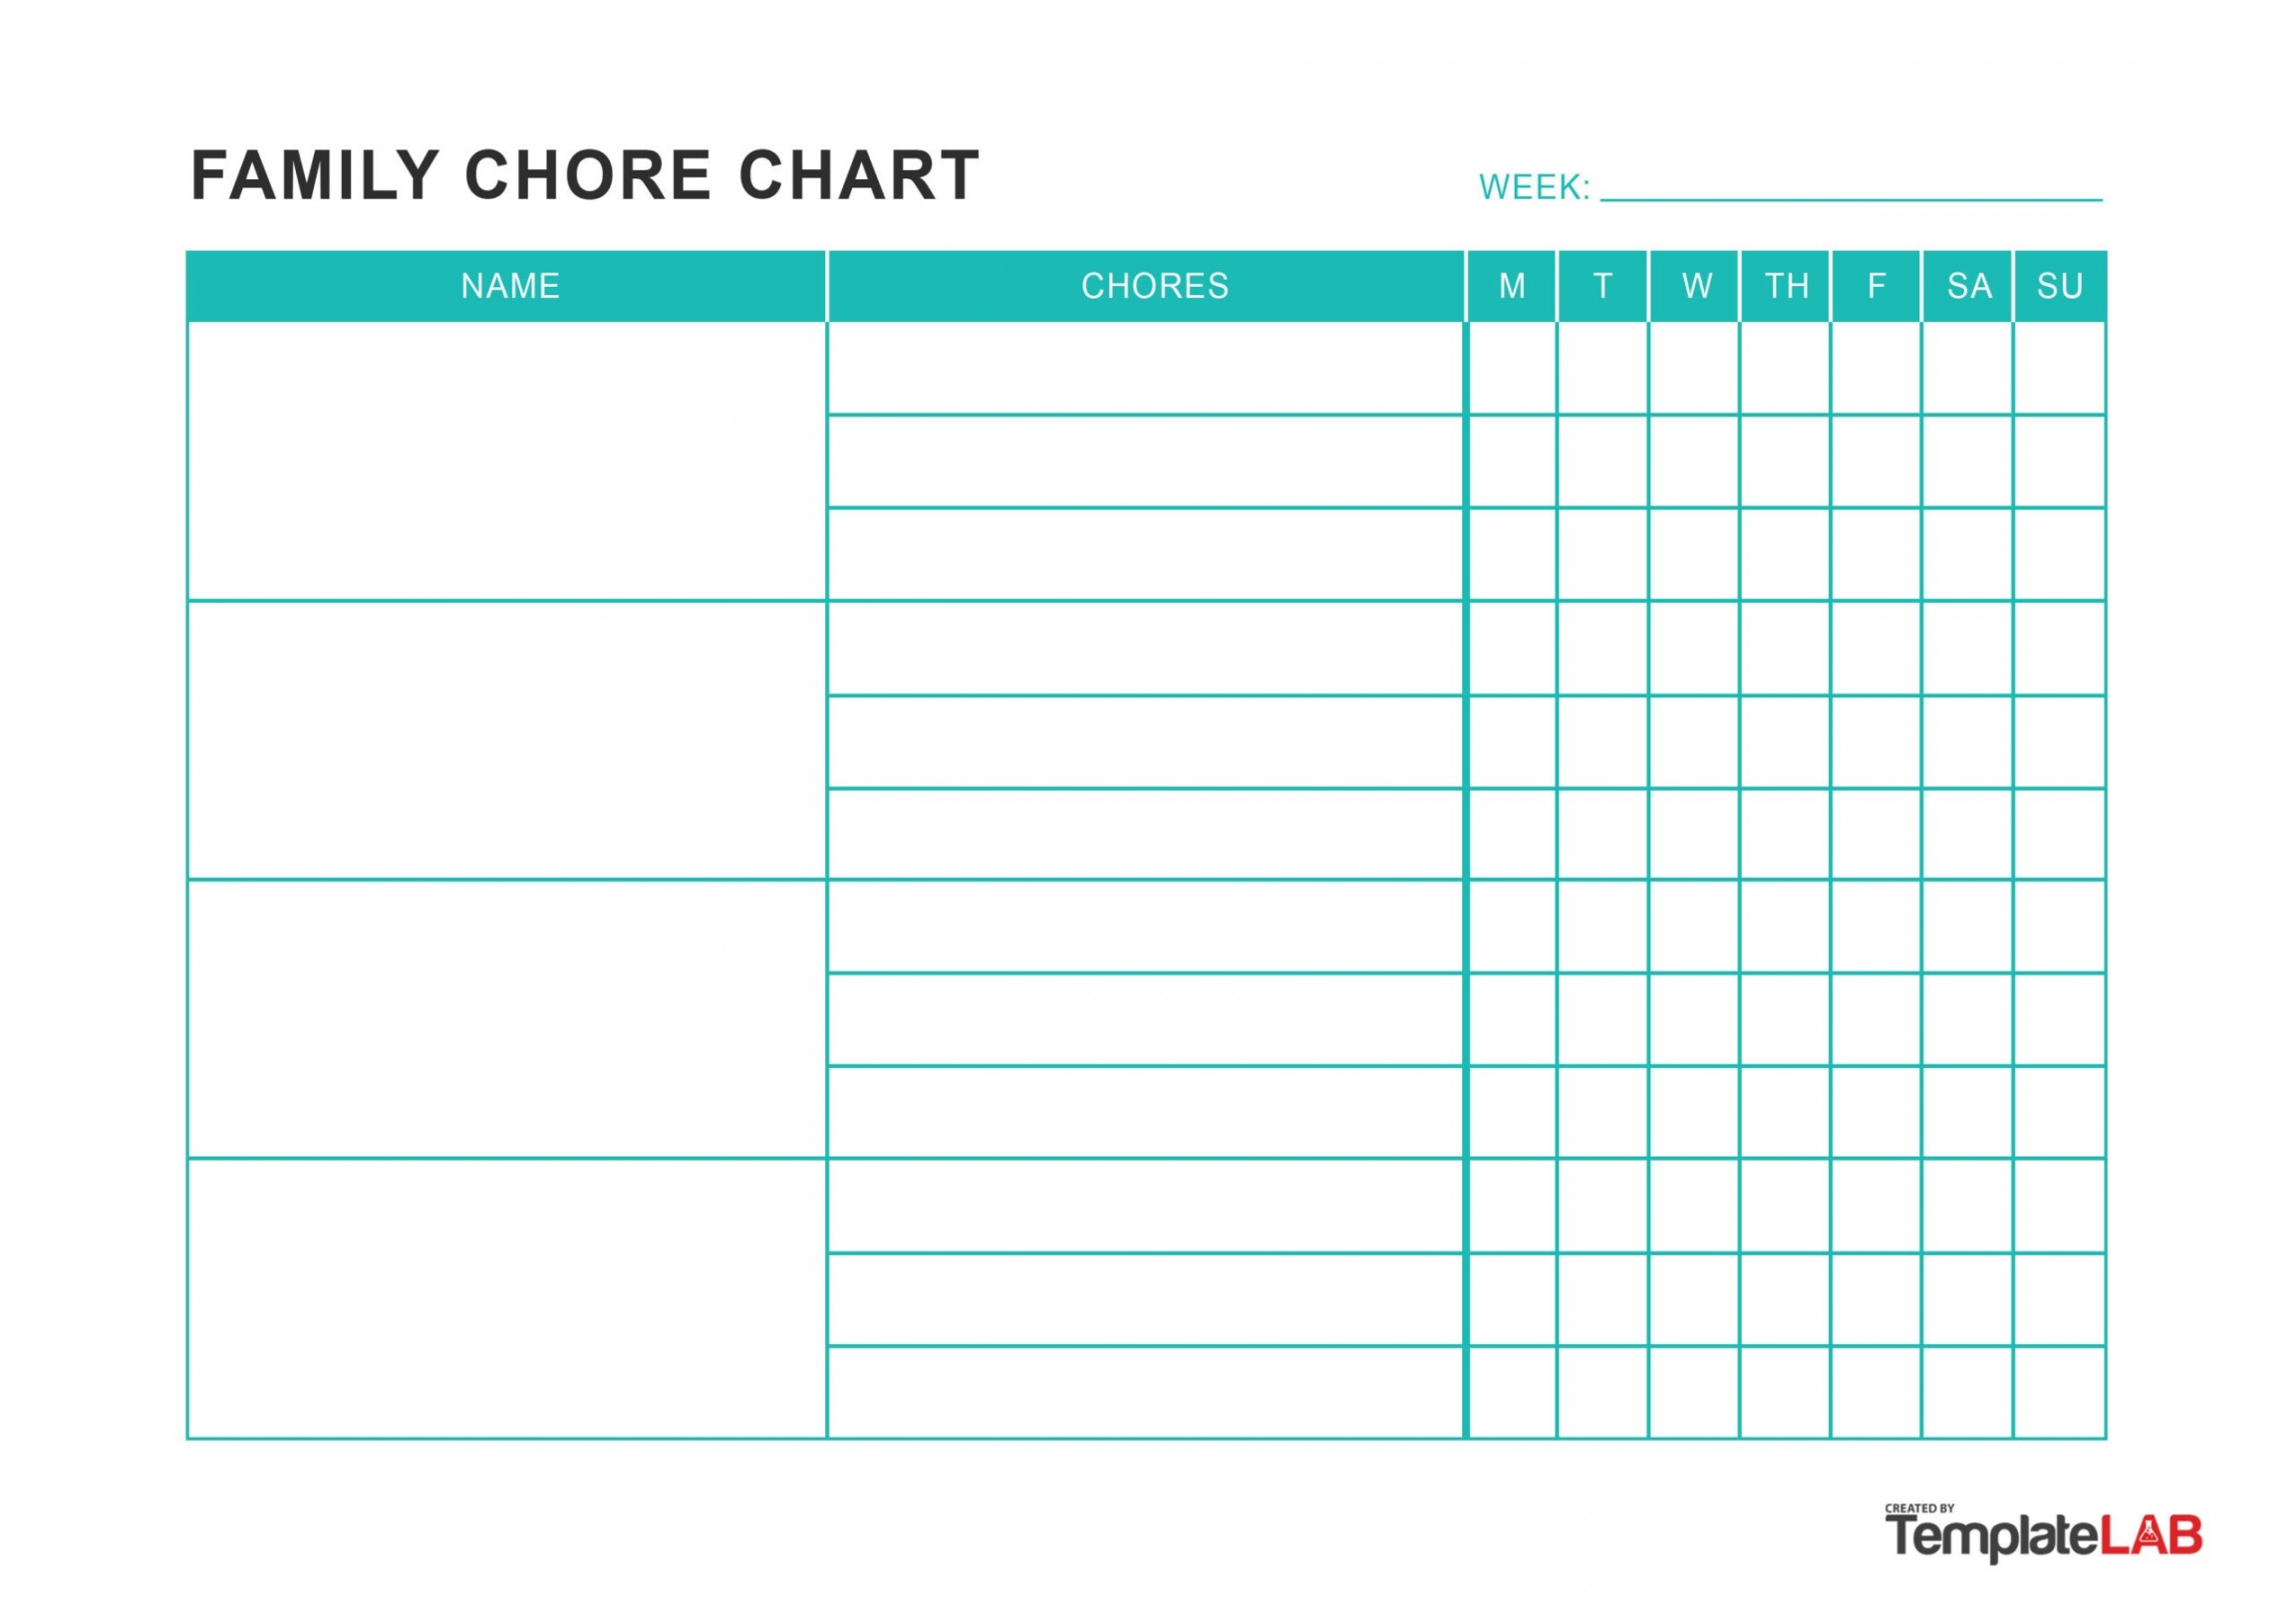 FREE Chore Chart Templates for Kids ᐅ TemplateLab - FREE Printables - Weekly Chore Chart Free Printable